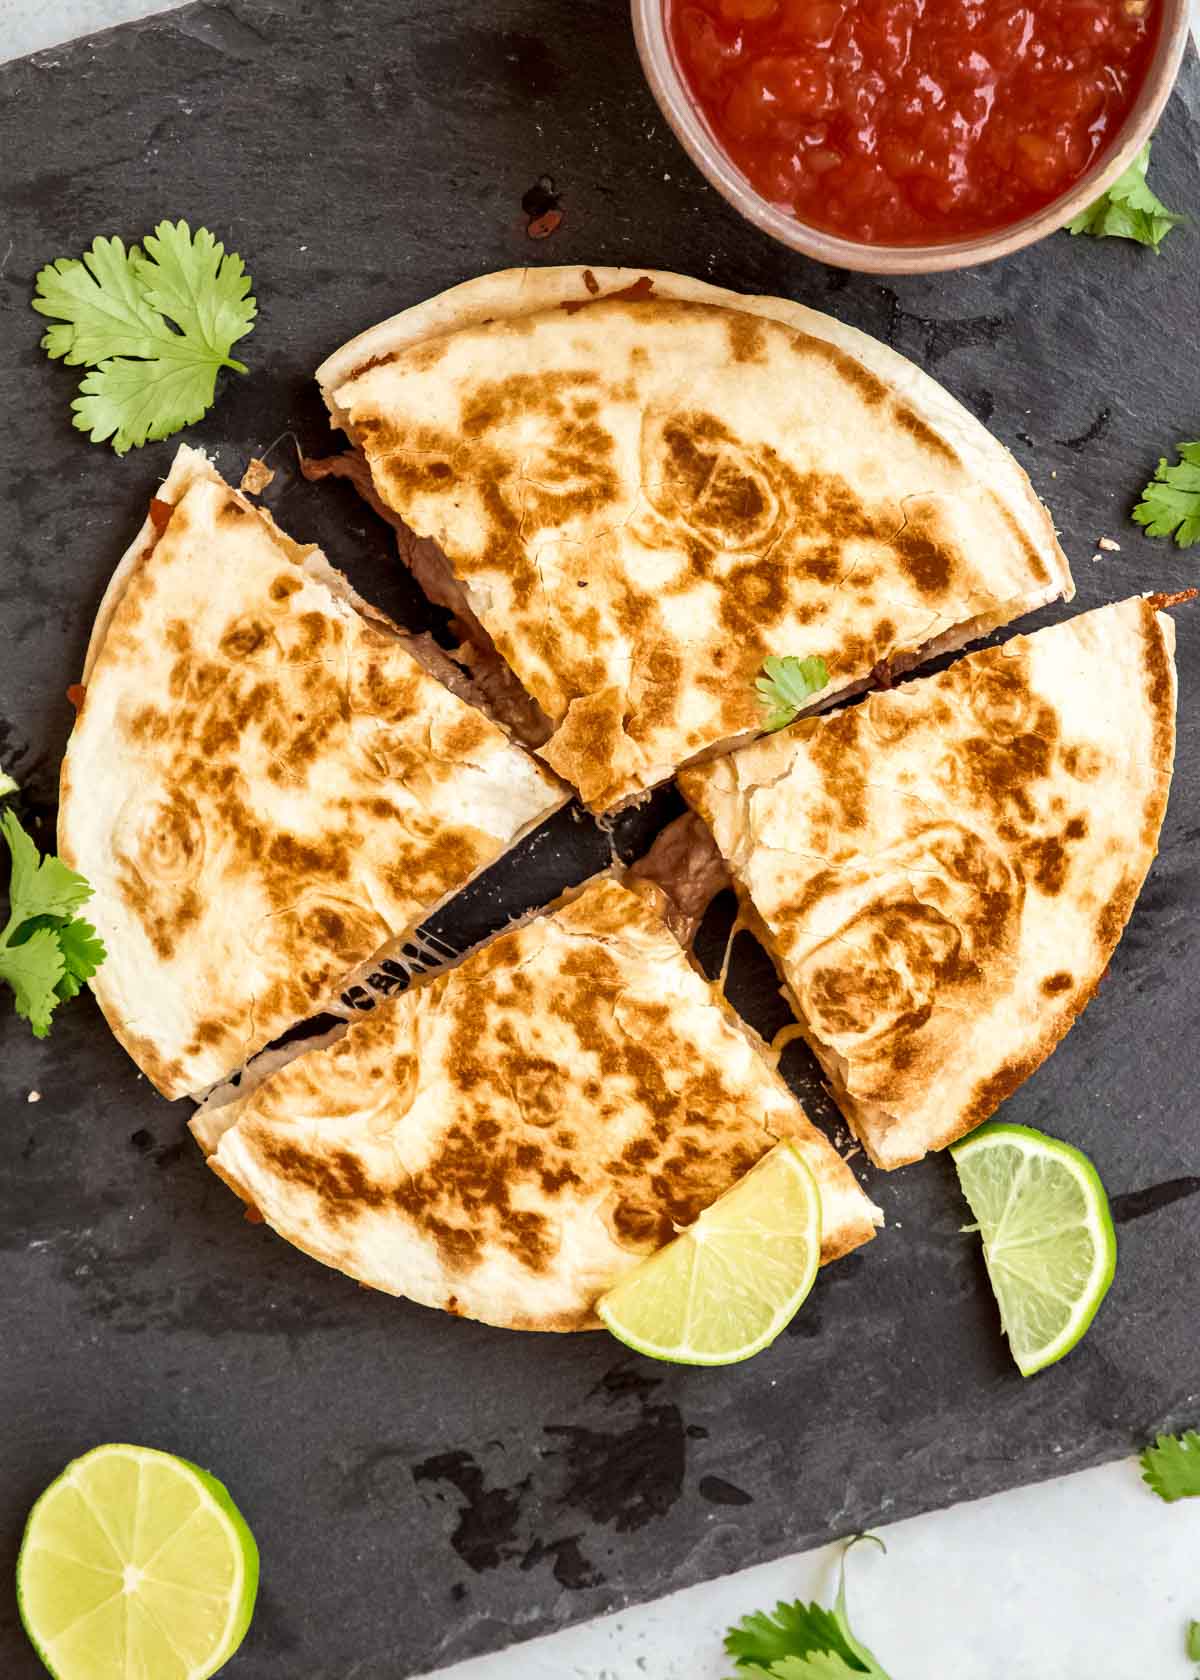 steak quesadilla cut into 4 sections on gray background